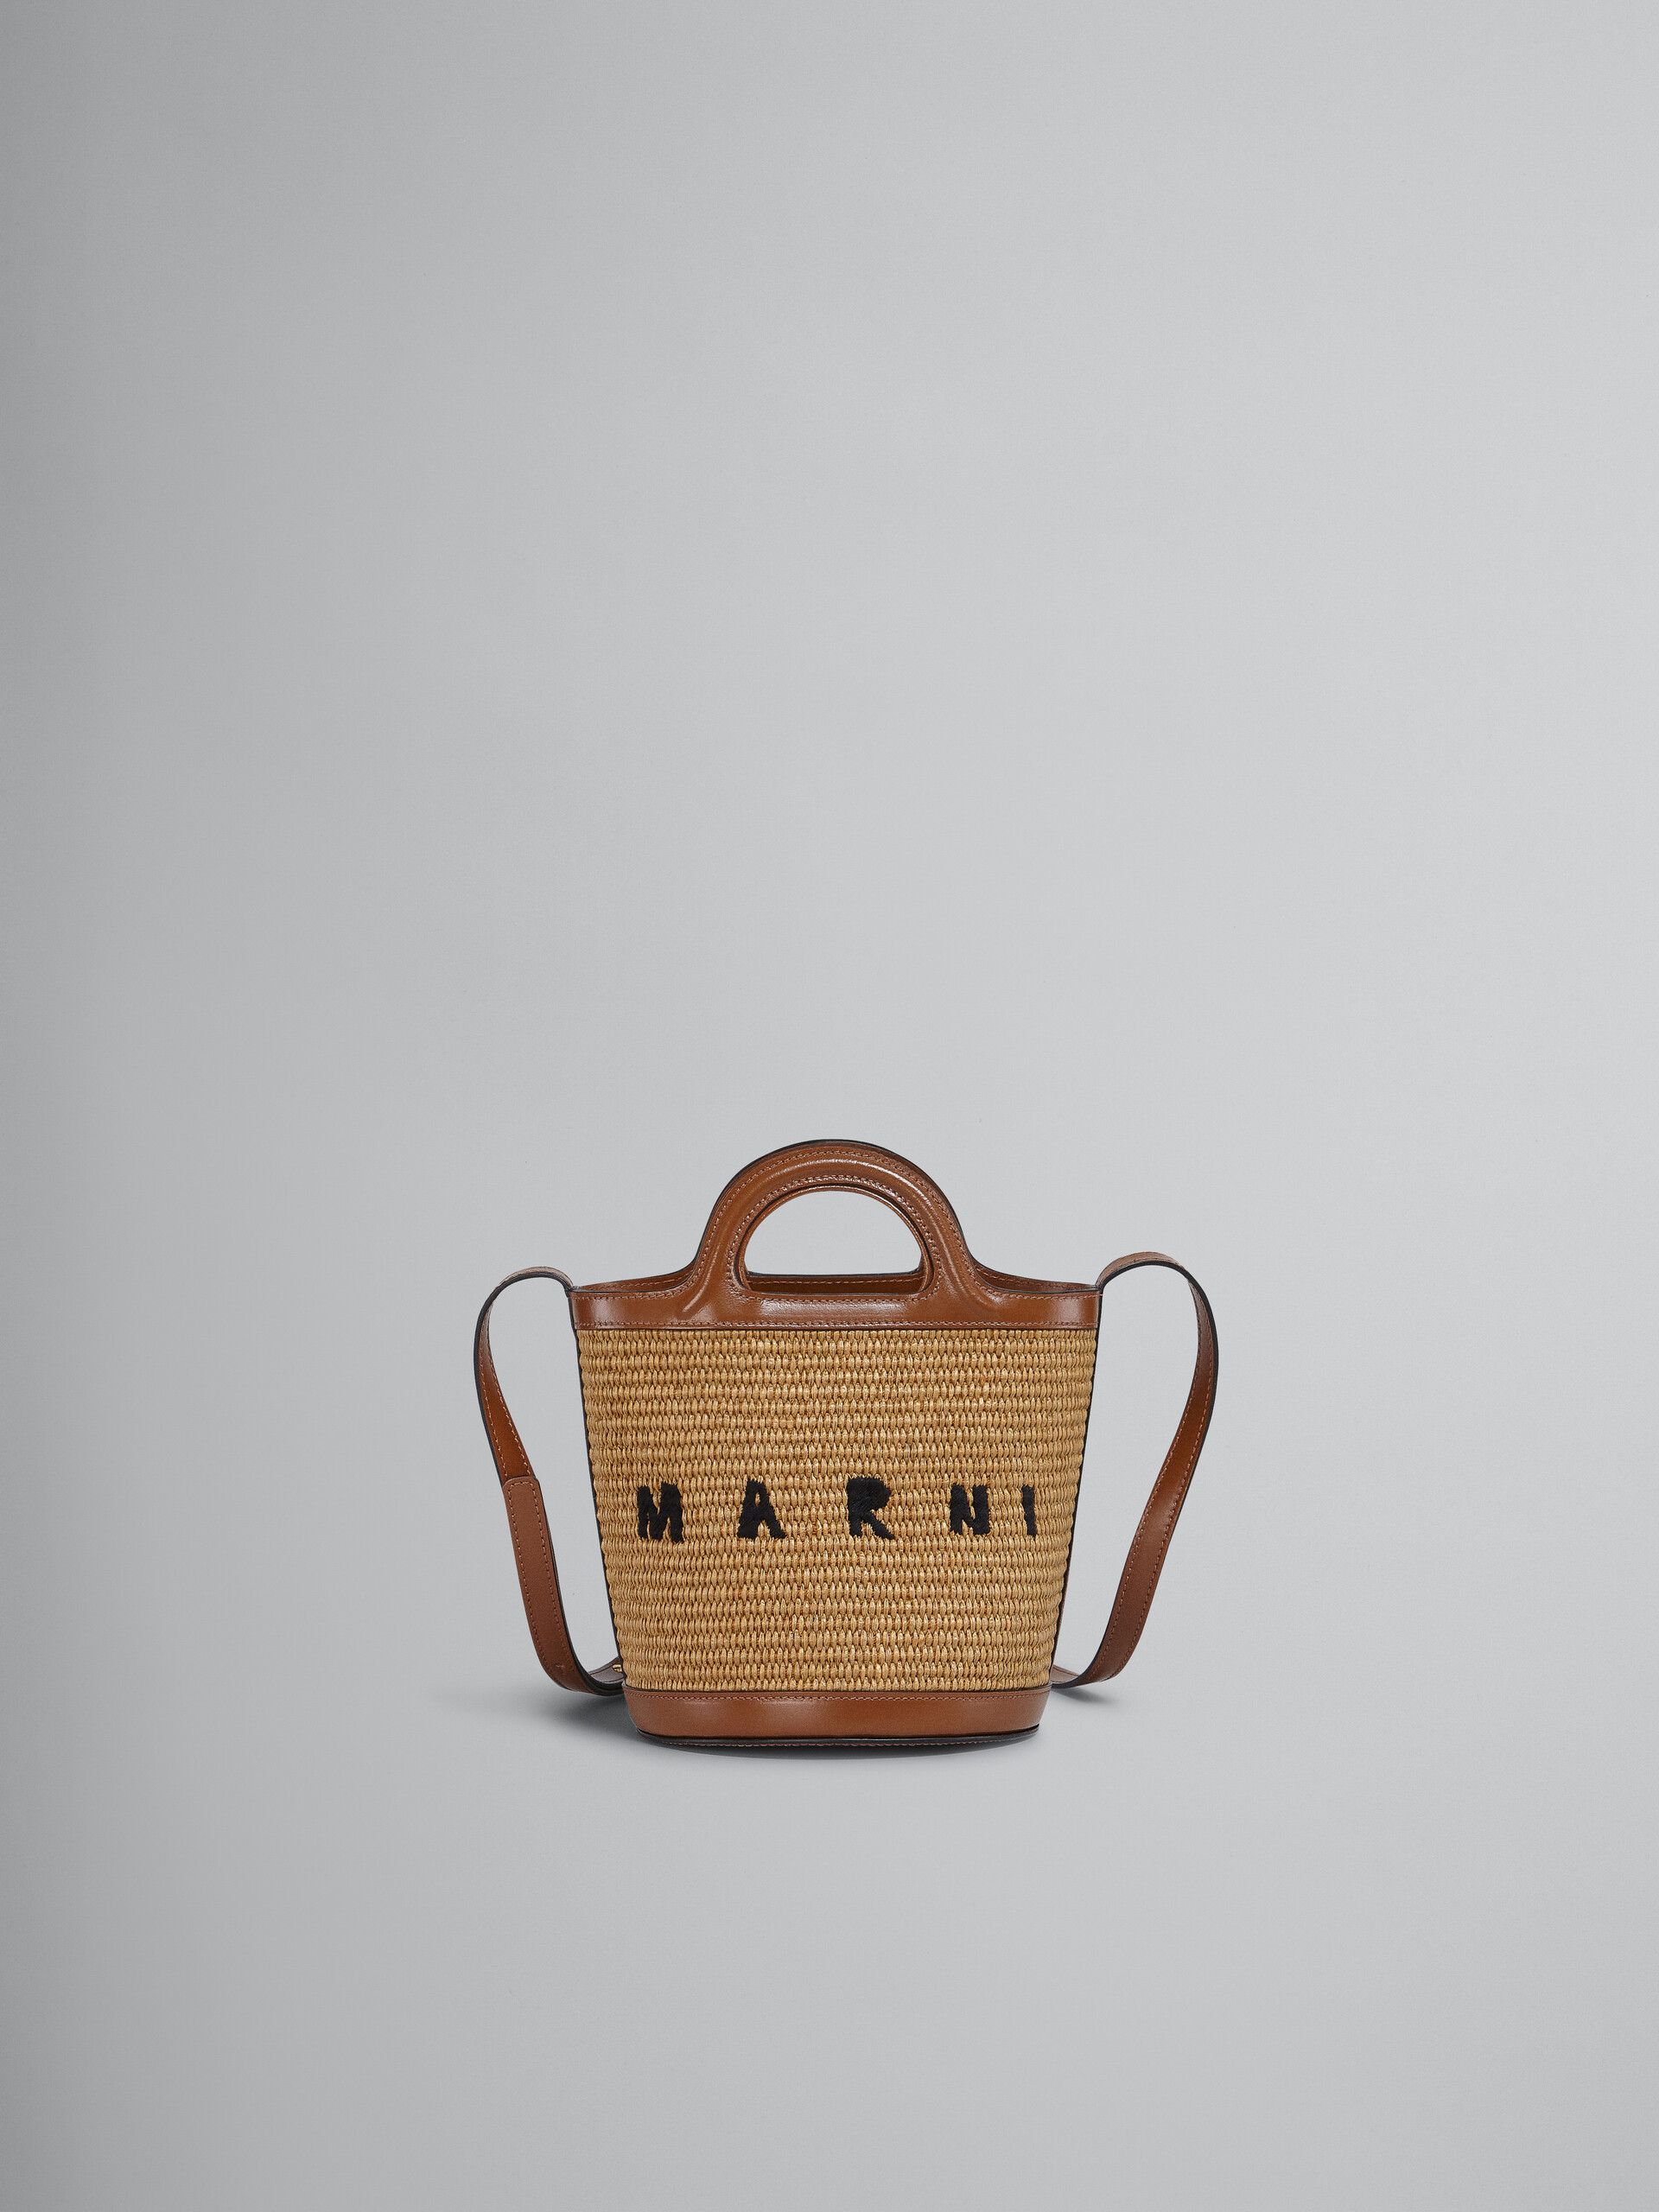 Tropicalia Small Bucket Bag in brown leather and raffia-effect fabric - Shoulder Bag - Image 1